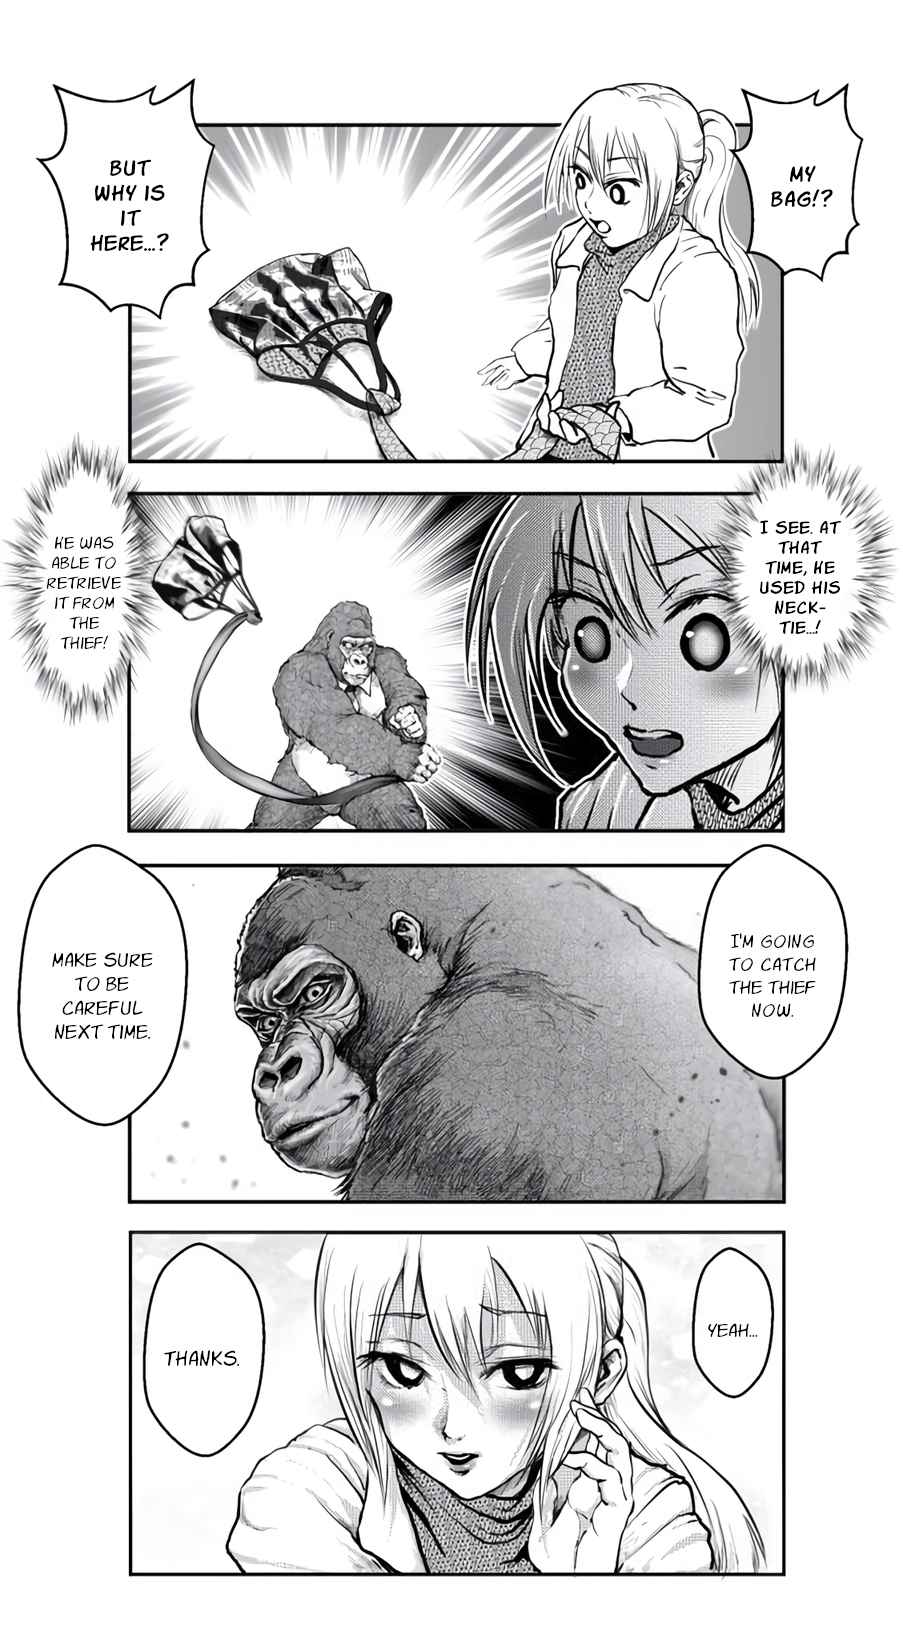 An Extremely Attractive Gorilla Ch. 4 Thief